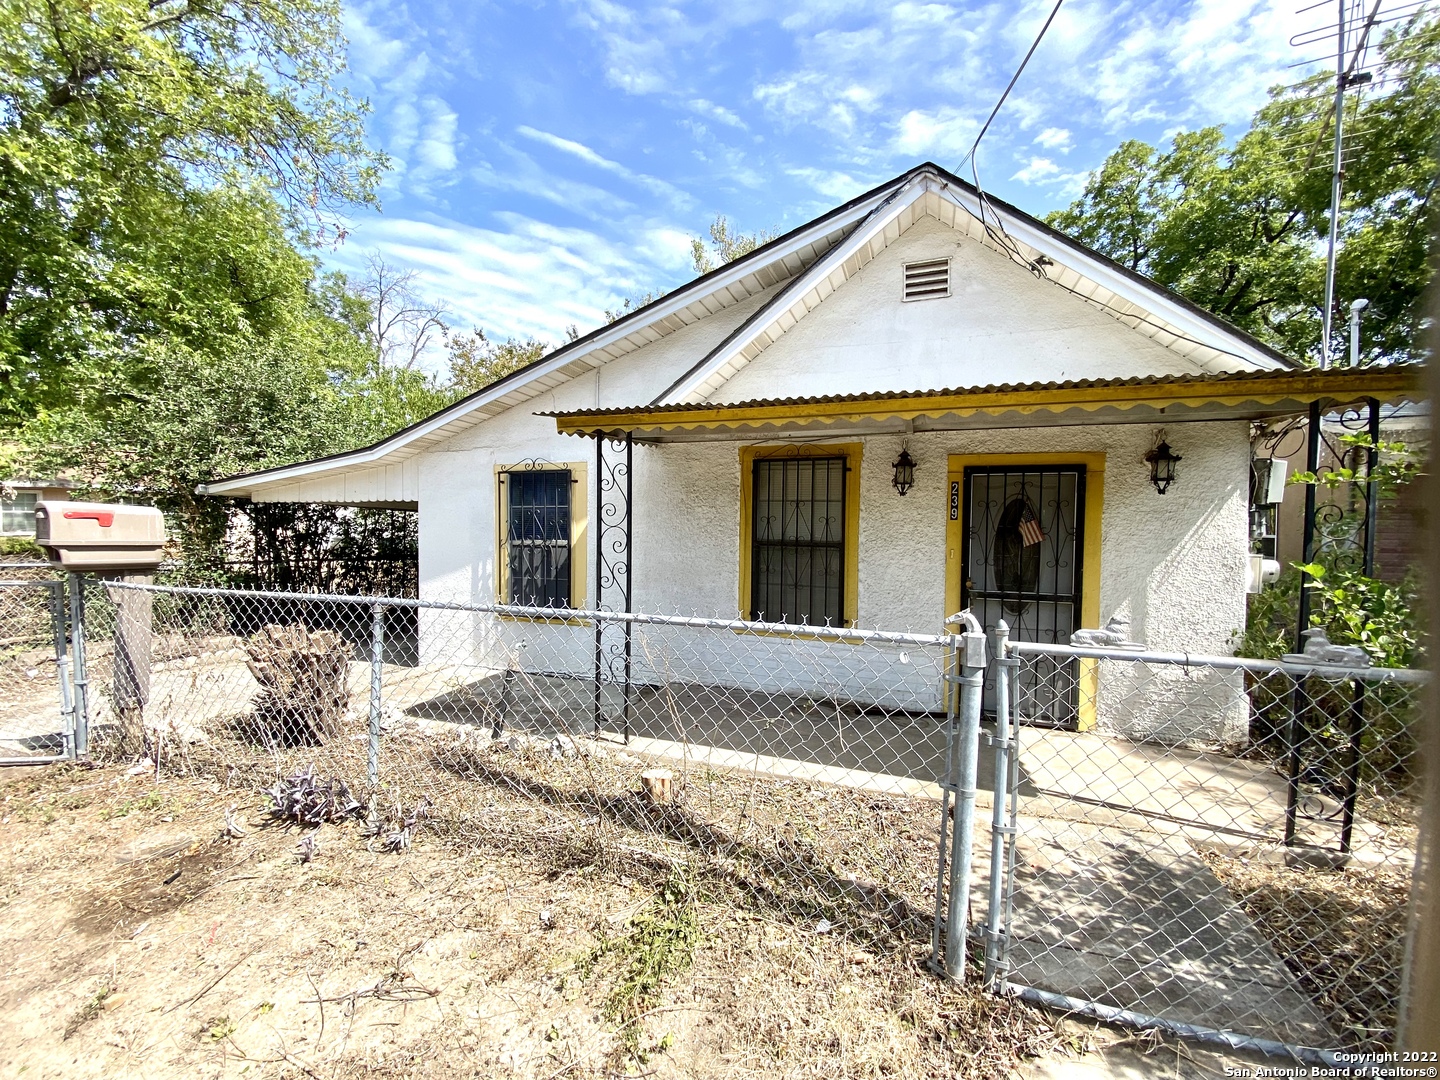 Hello Investors, this property is South of Downtown San Antonio. Just a few minutes to the Riverwalk & Southtown shops. FIX & FLIP or Hold as a Rental Income. New Survey provided & Clean Title. It's a fixer upper. SOLD AS IS. Call your local agent for a showing appointment.